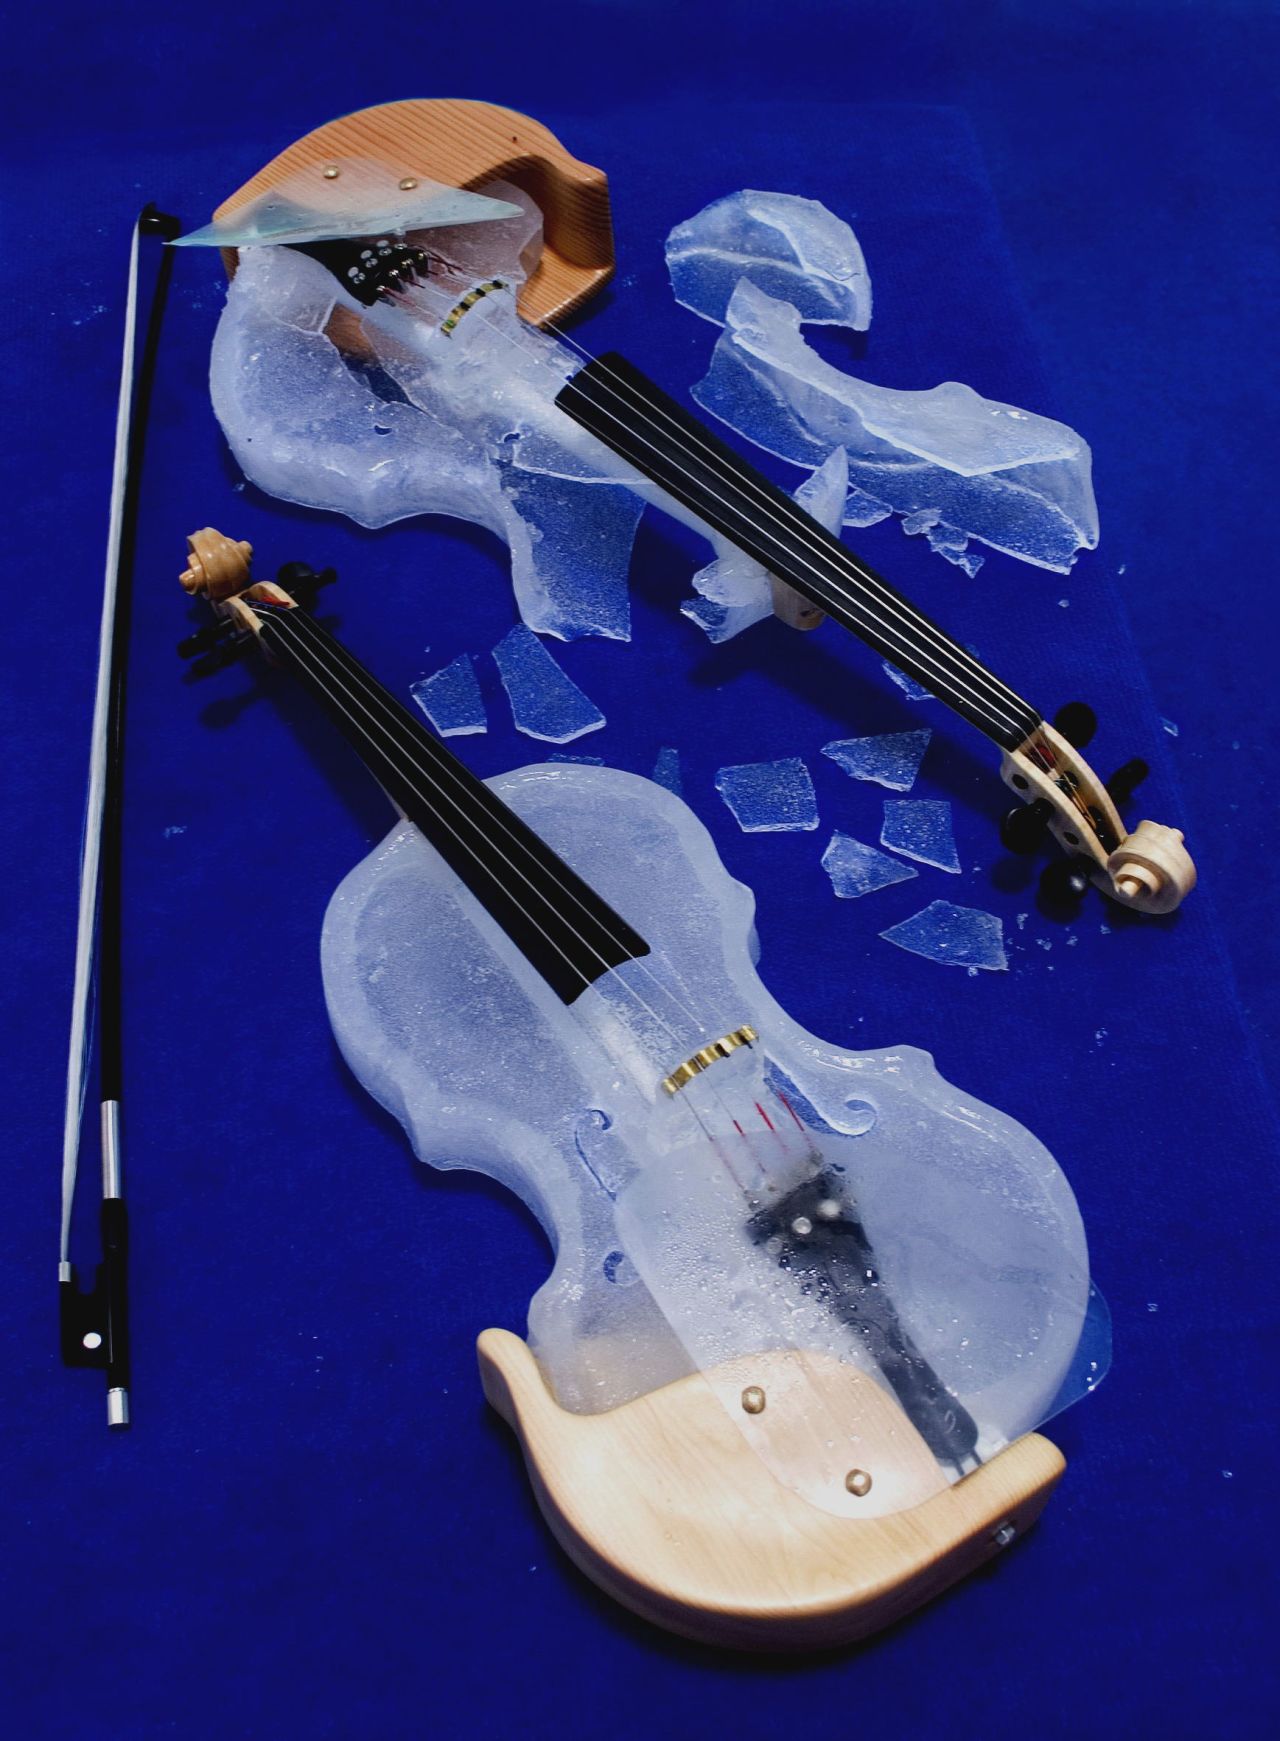 The sound is also sharper, Linhart says, but ice instruments are also more fragile than those in a traditional orchestra. Insurance must be tricky.